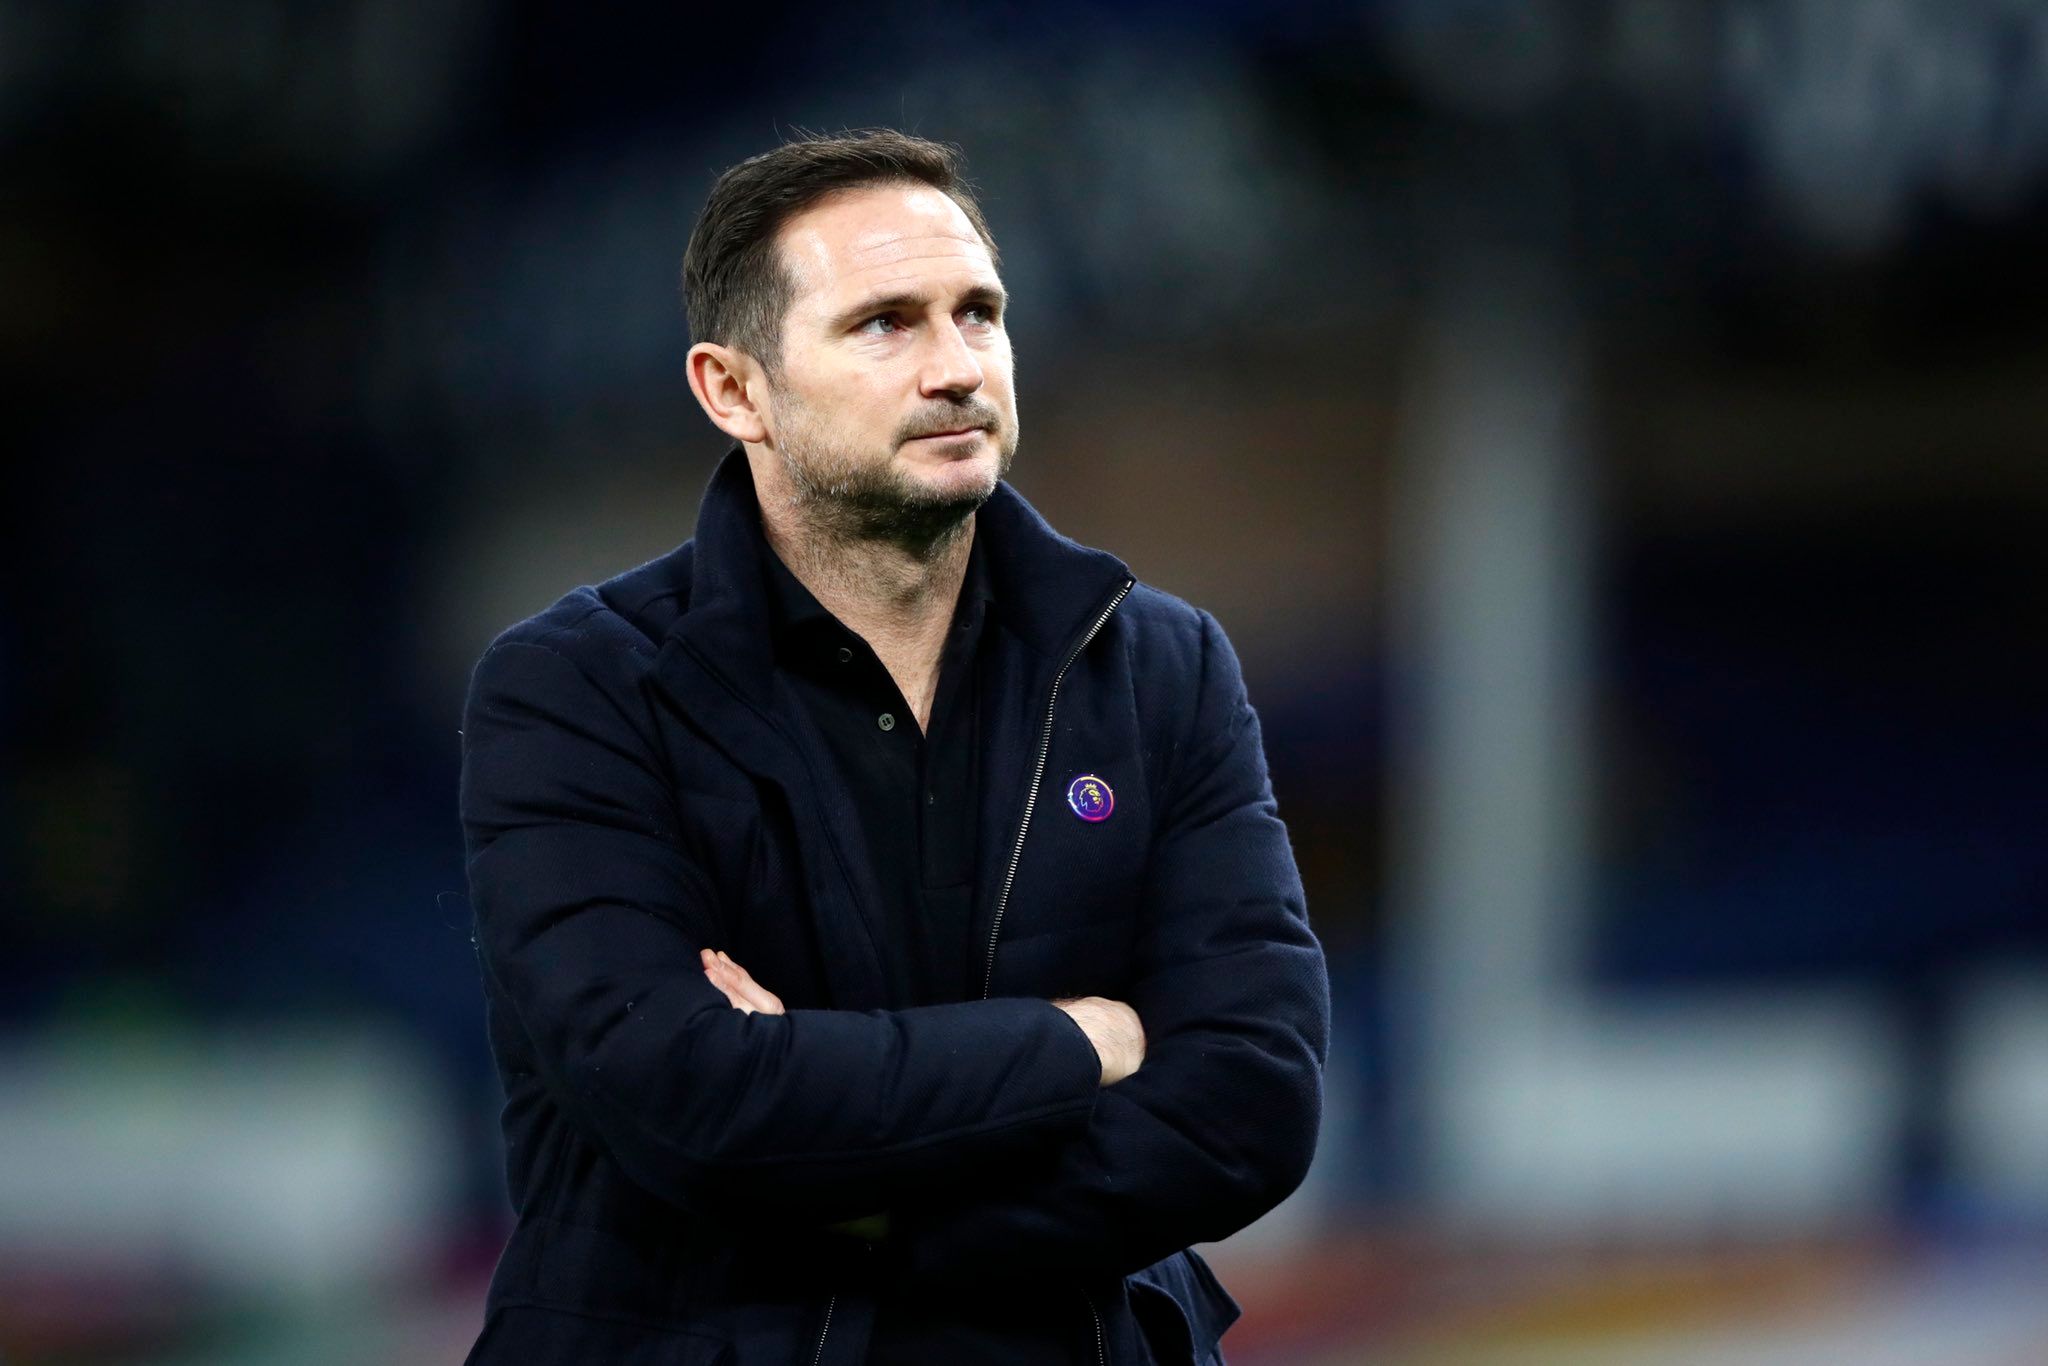 ‘Man of the match today’: Lampard hails Everton fans after win over Chelsea